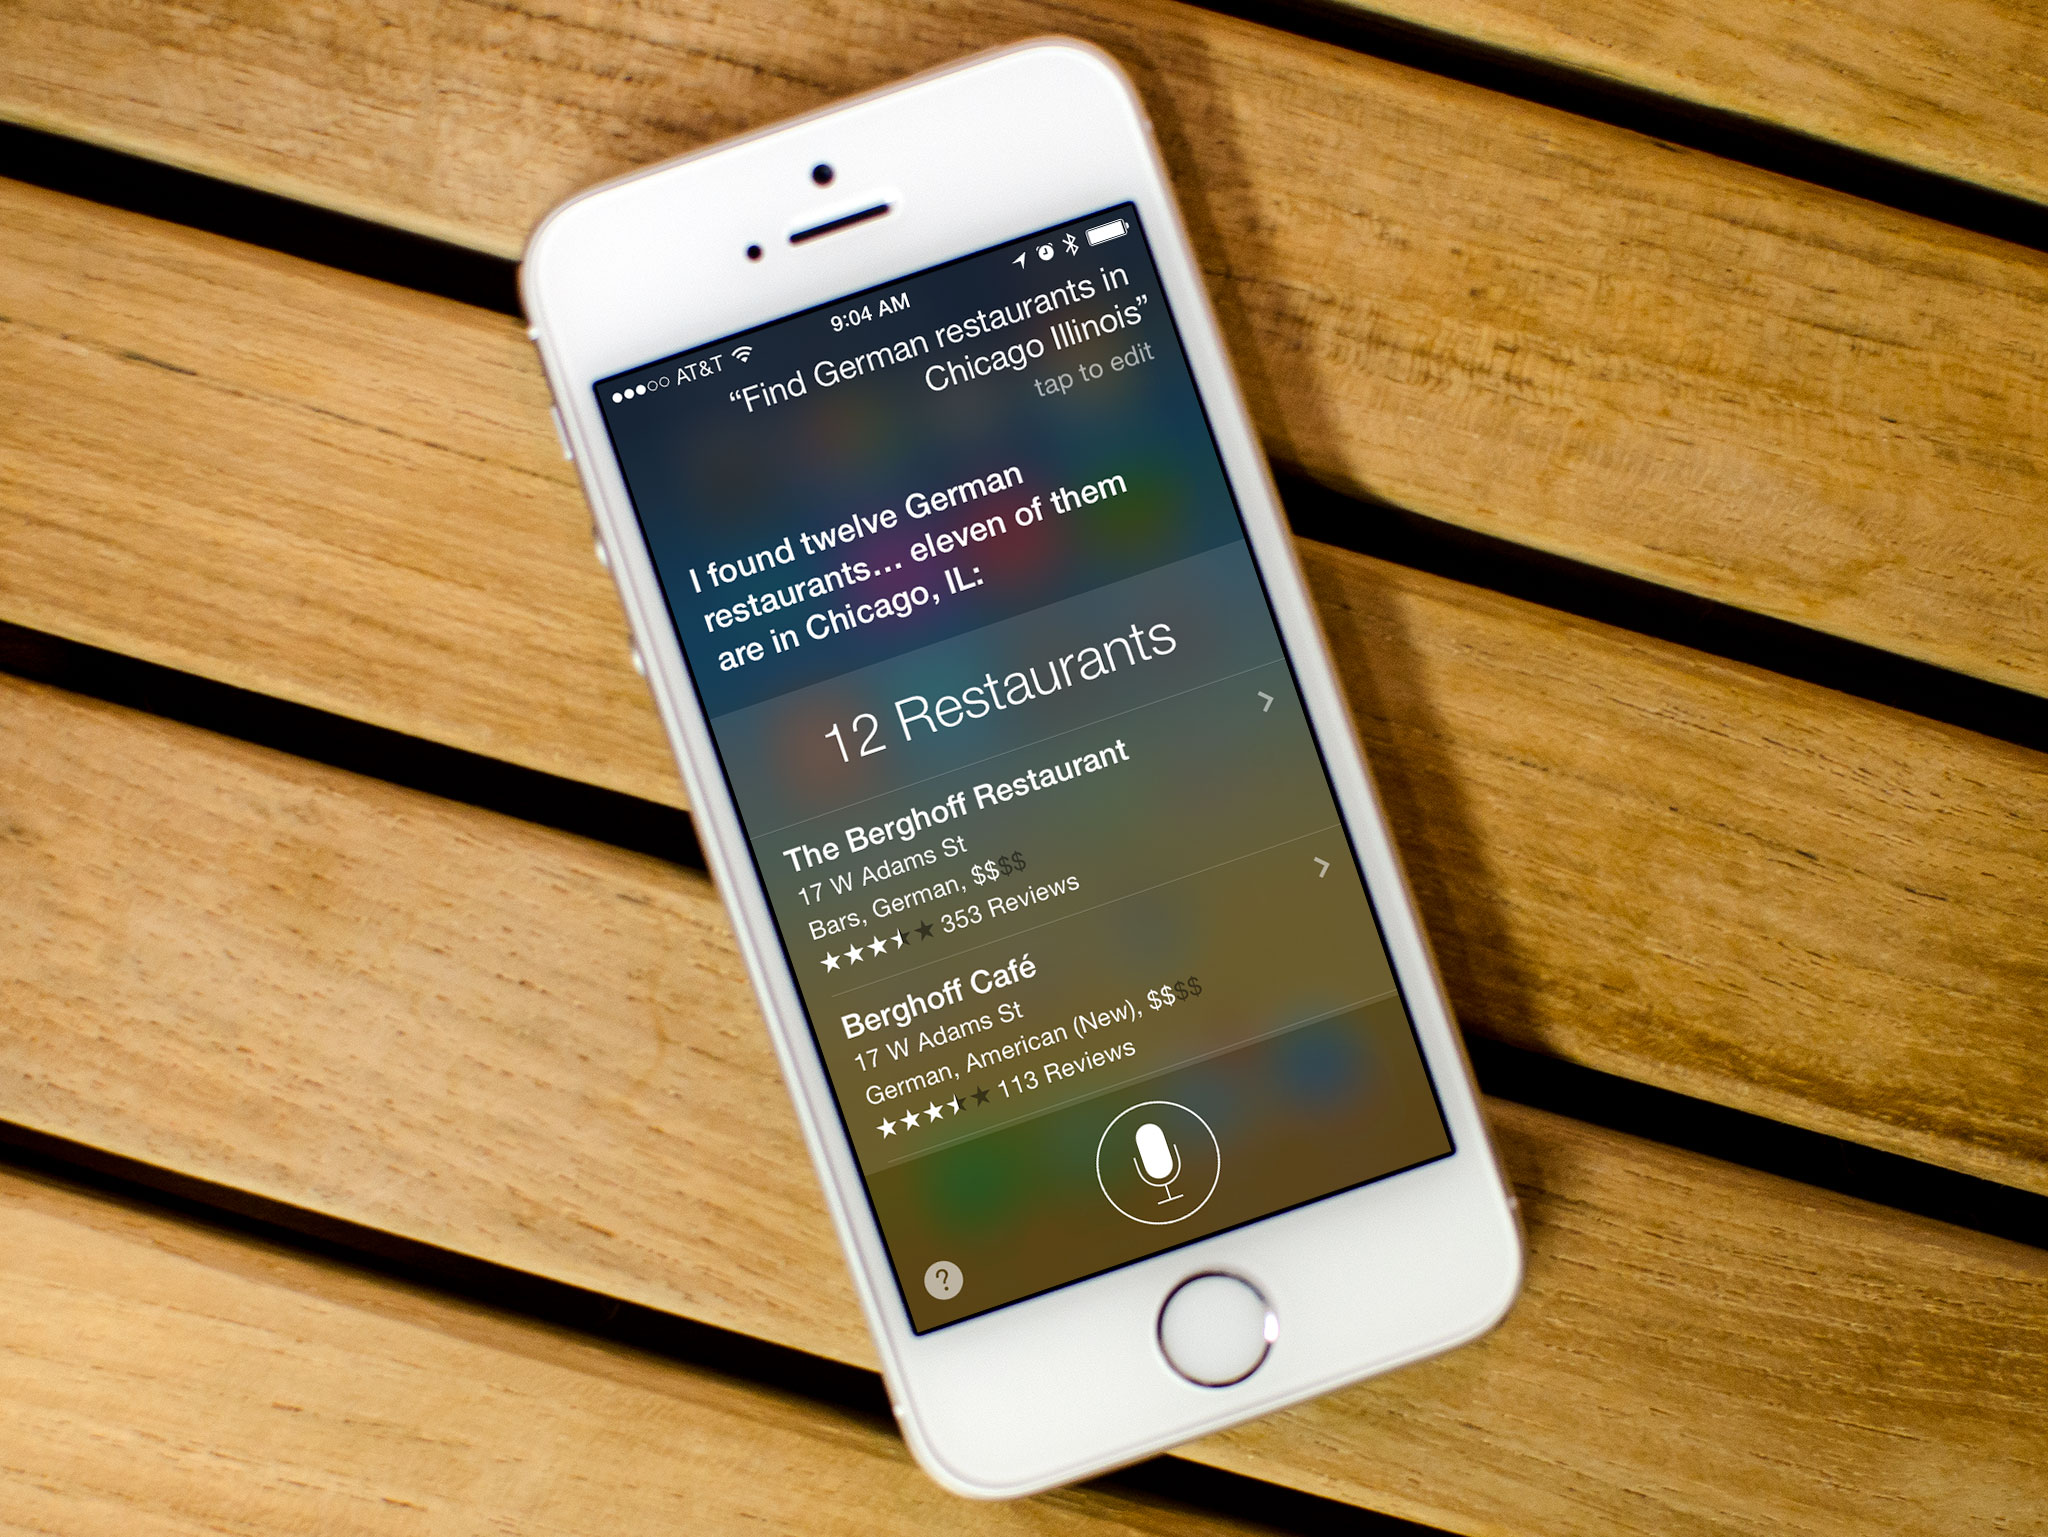 How to search for different types of restaurants with Siri